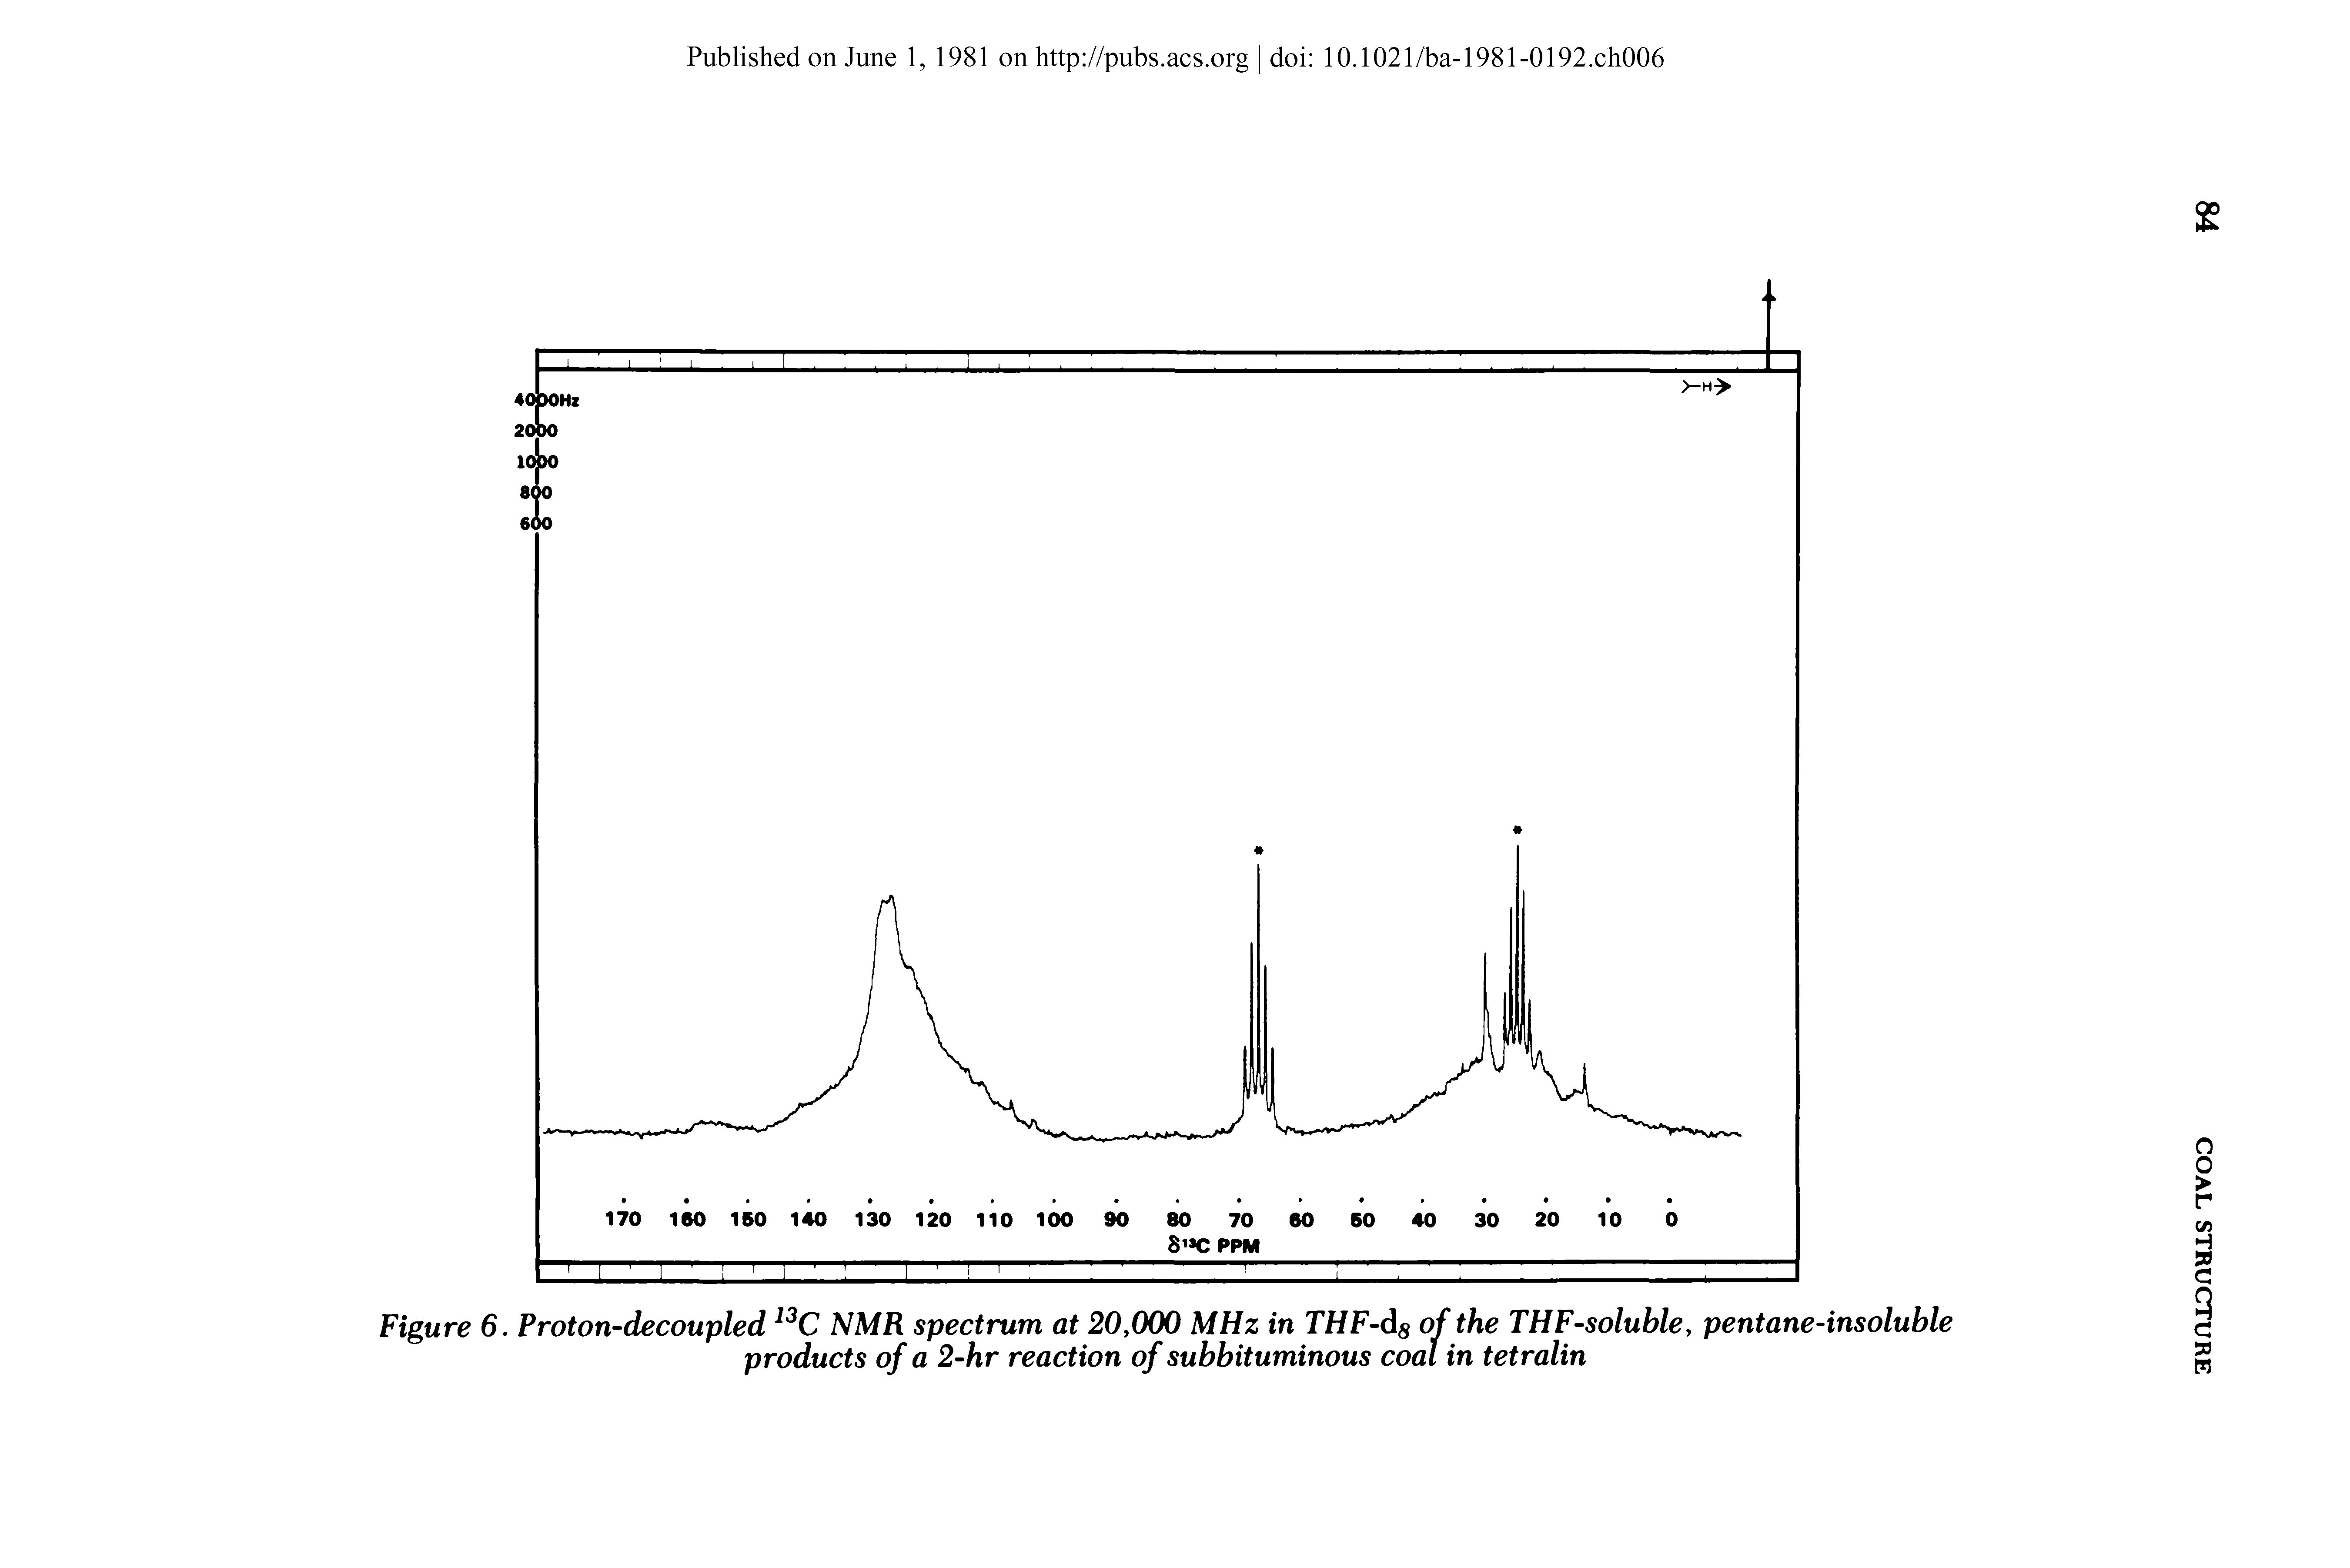 Figure 6. Proton-decoupled NMR spectrum at 20,000 MHz in THF-dg of the THF-soluble, pentane-insoluble products of a 2-hr reaction of subbituminous coal in tetralin...